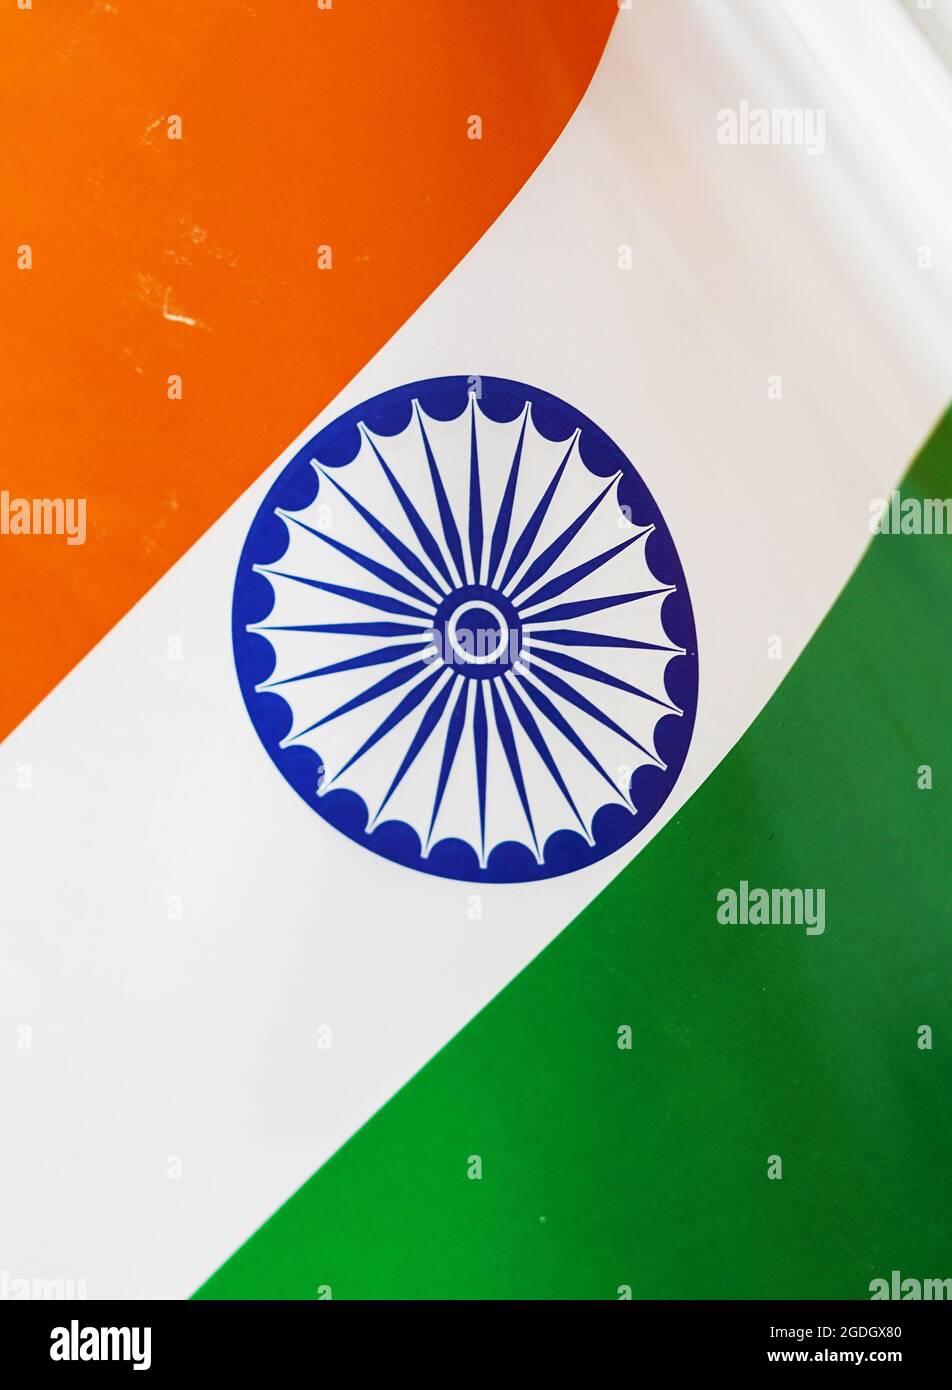 Waving flag of India. Independence day, Republic Day of India. Tricolor flag symbols with Ashoka Chakra spokes of India. Paper Flag or poster Stock Photo